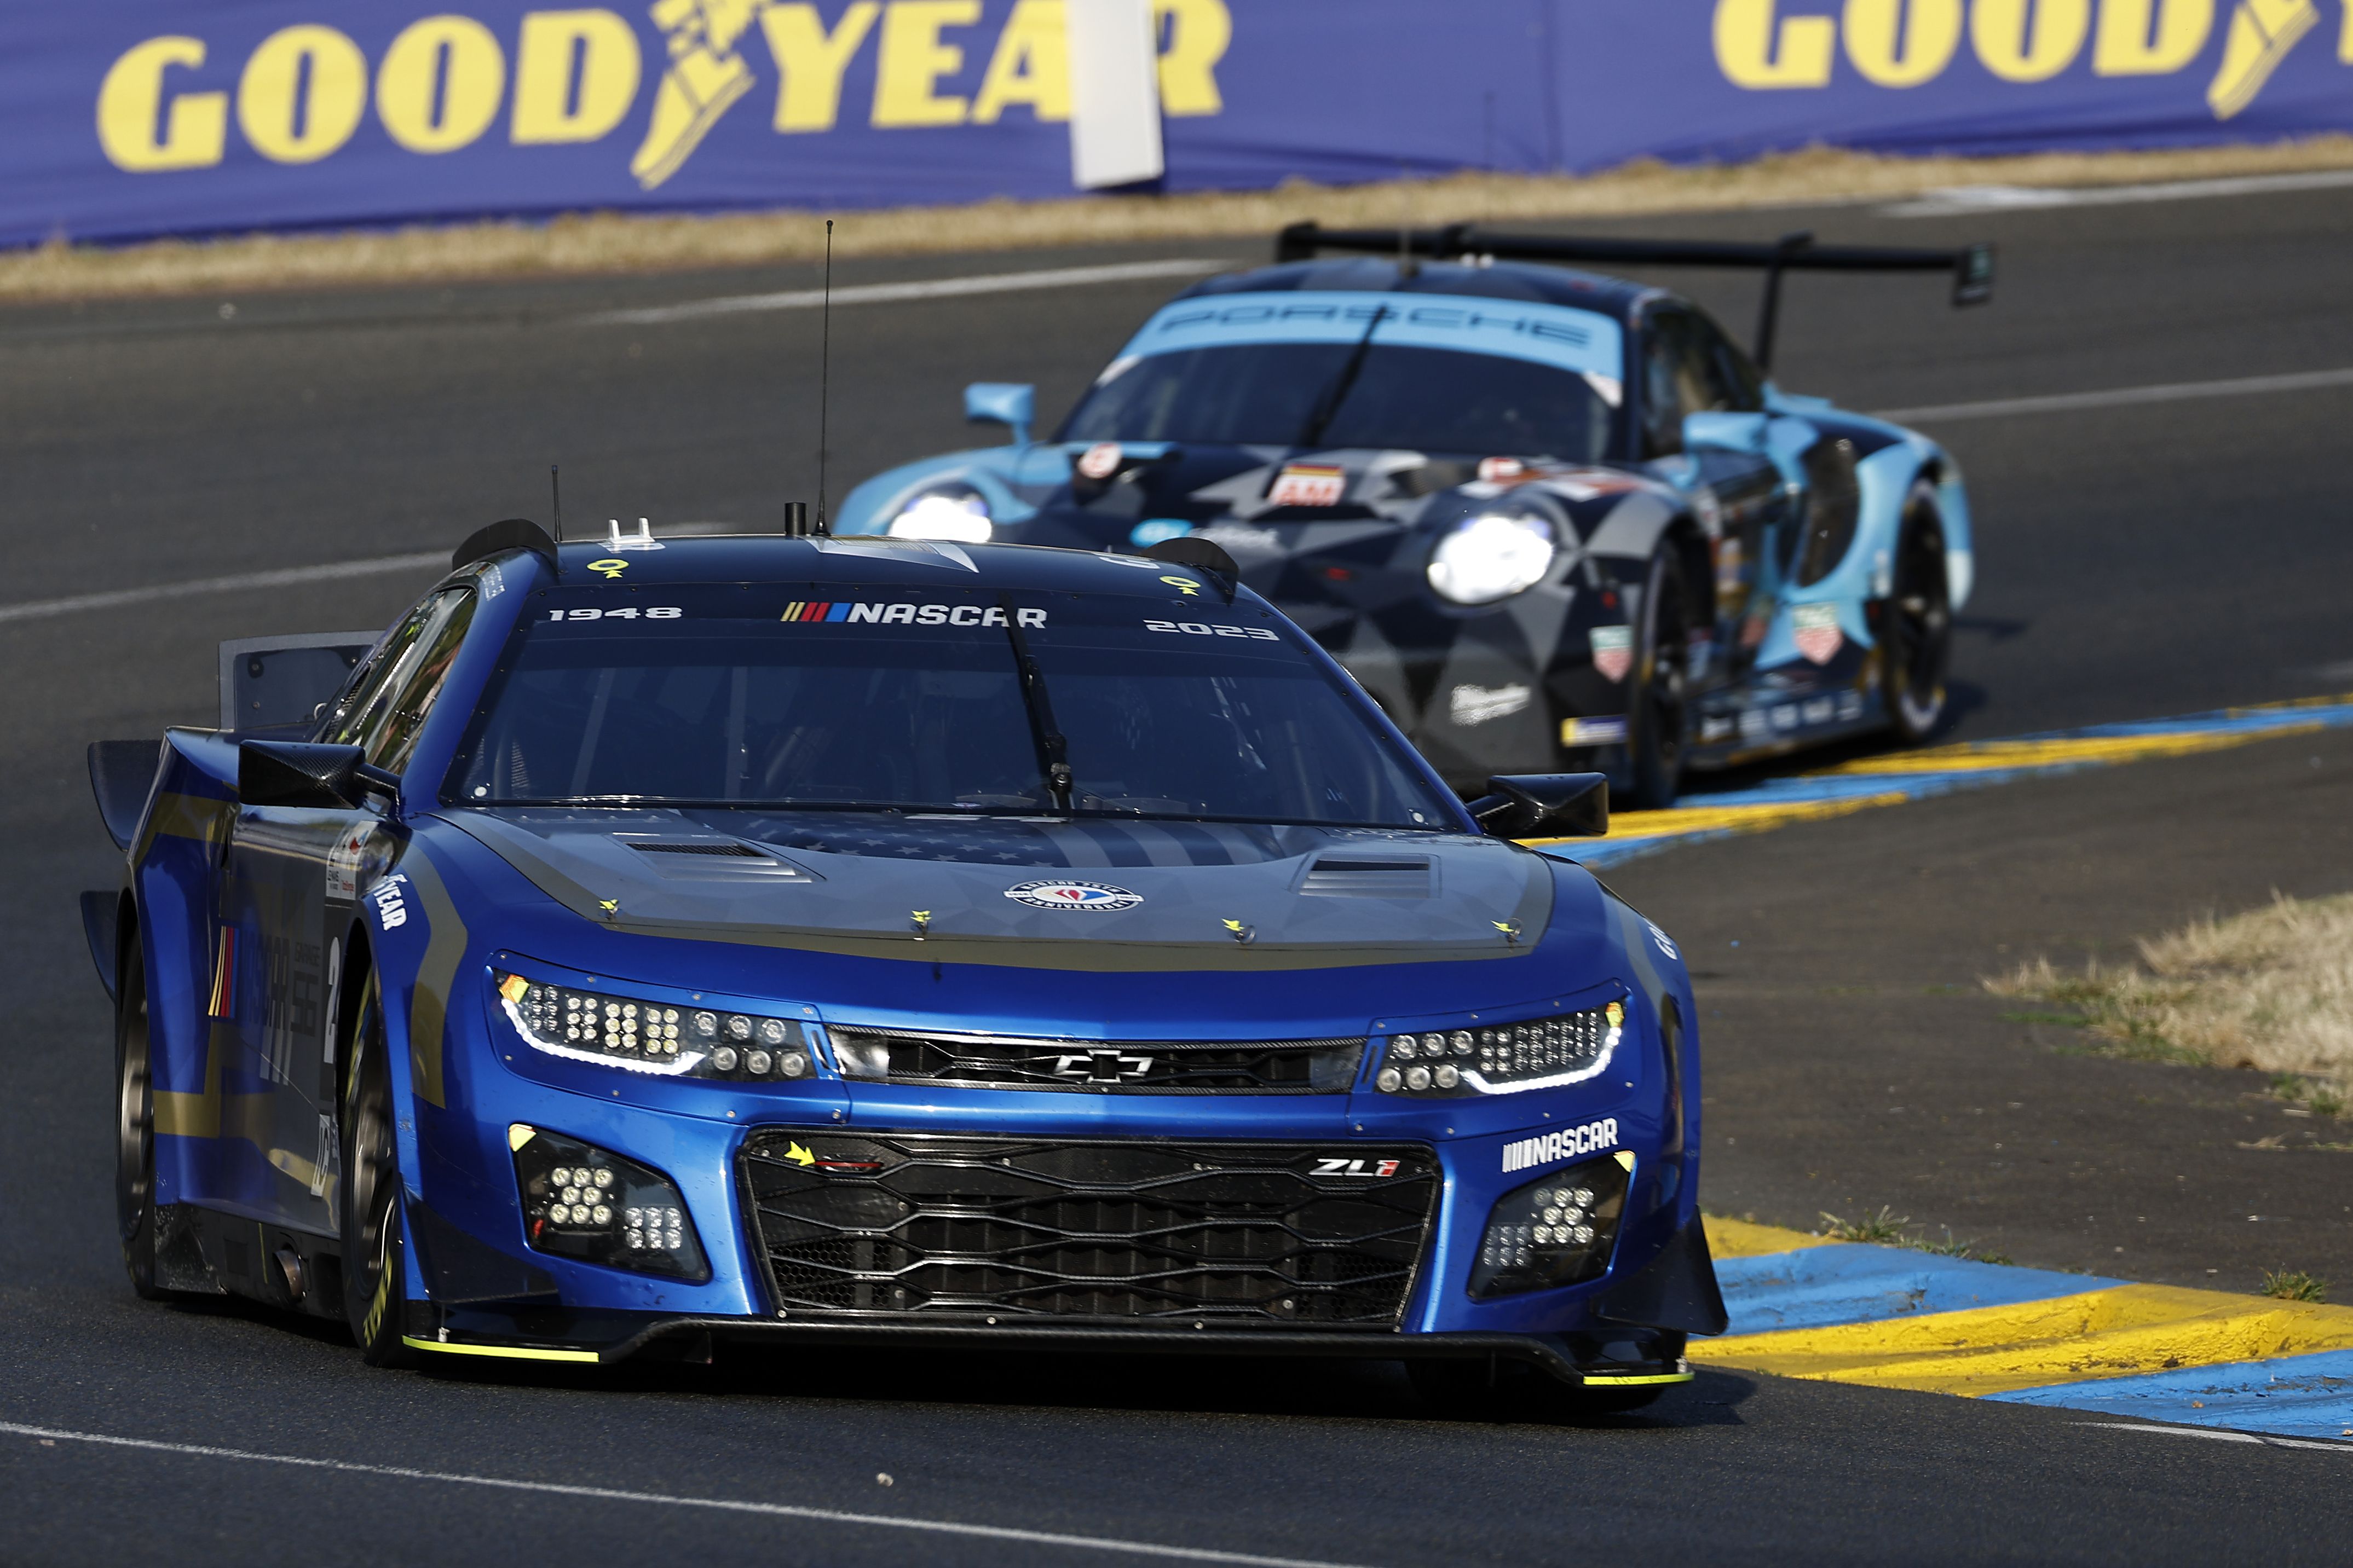 NASCARs Longer-Than-You-Realize Relationship with Road Racing